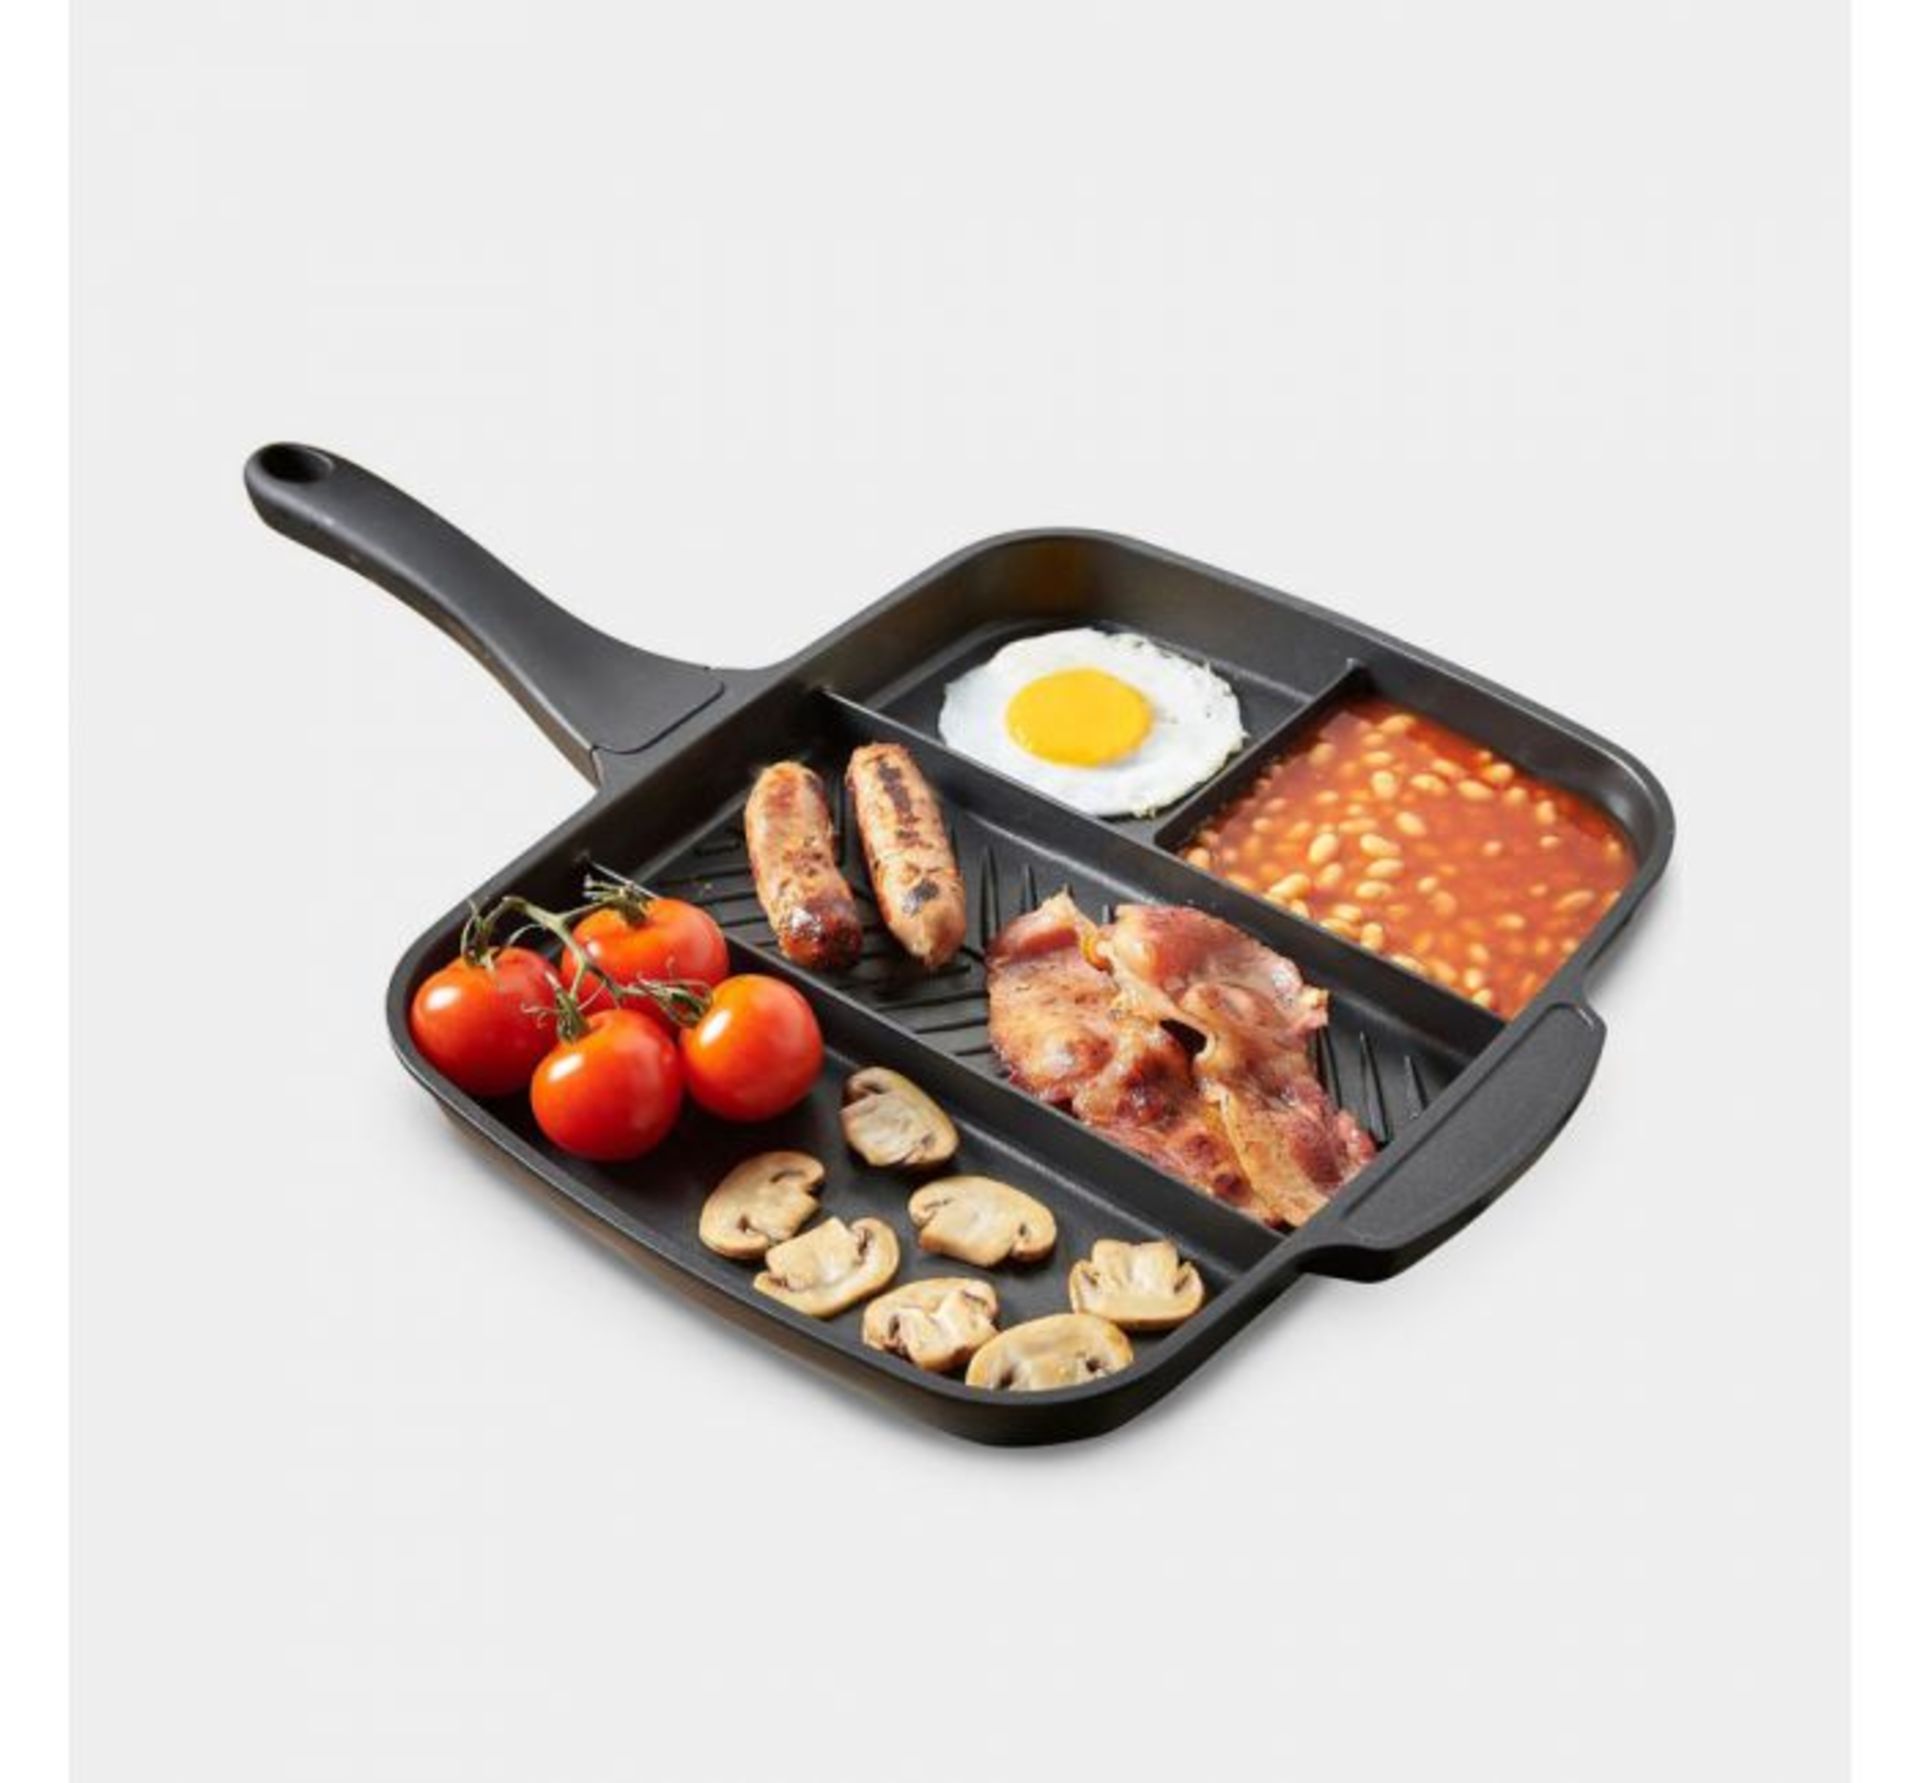 (K14) Multi Section Frying Pan Four sections means you can cook multiple foods simultaneously ... - Image 2 of 4